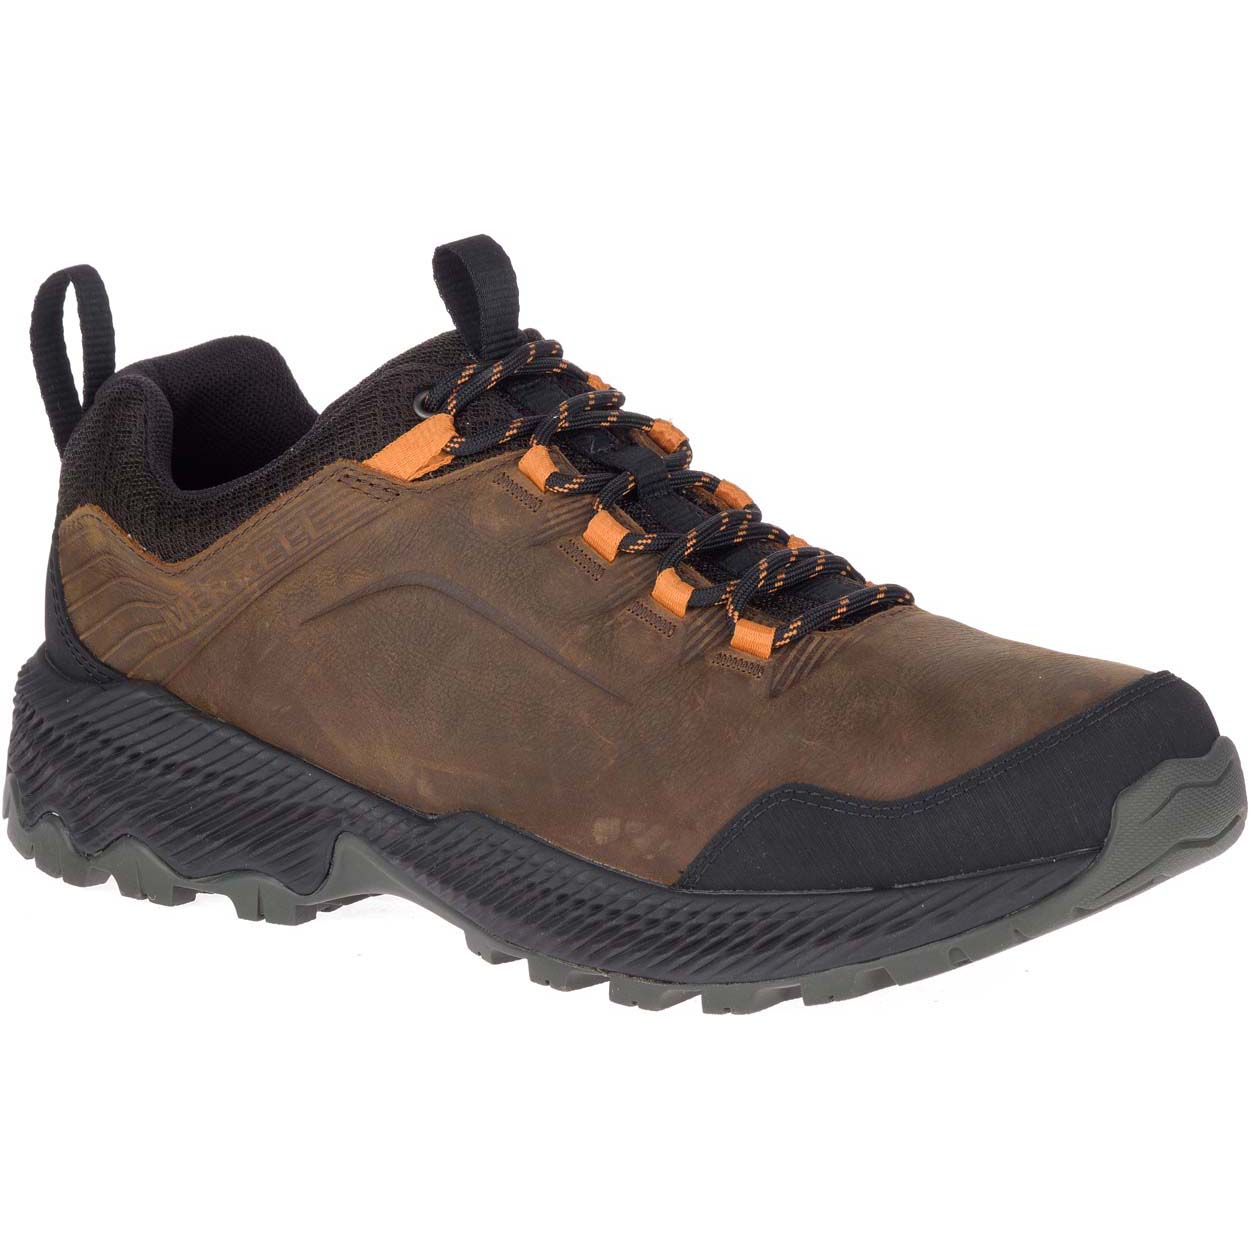 MERRELL - FORESTBOUND WP - HIKING SHOE - DARK EARTH